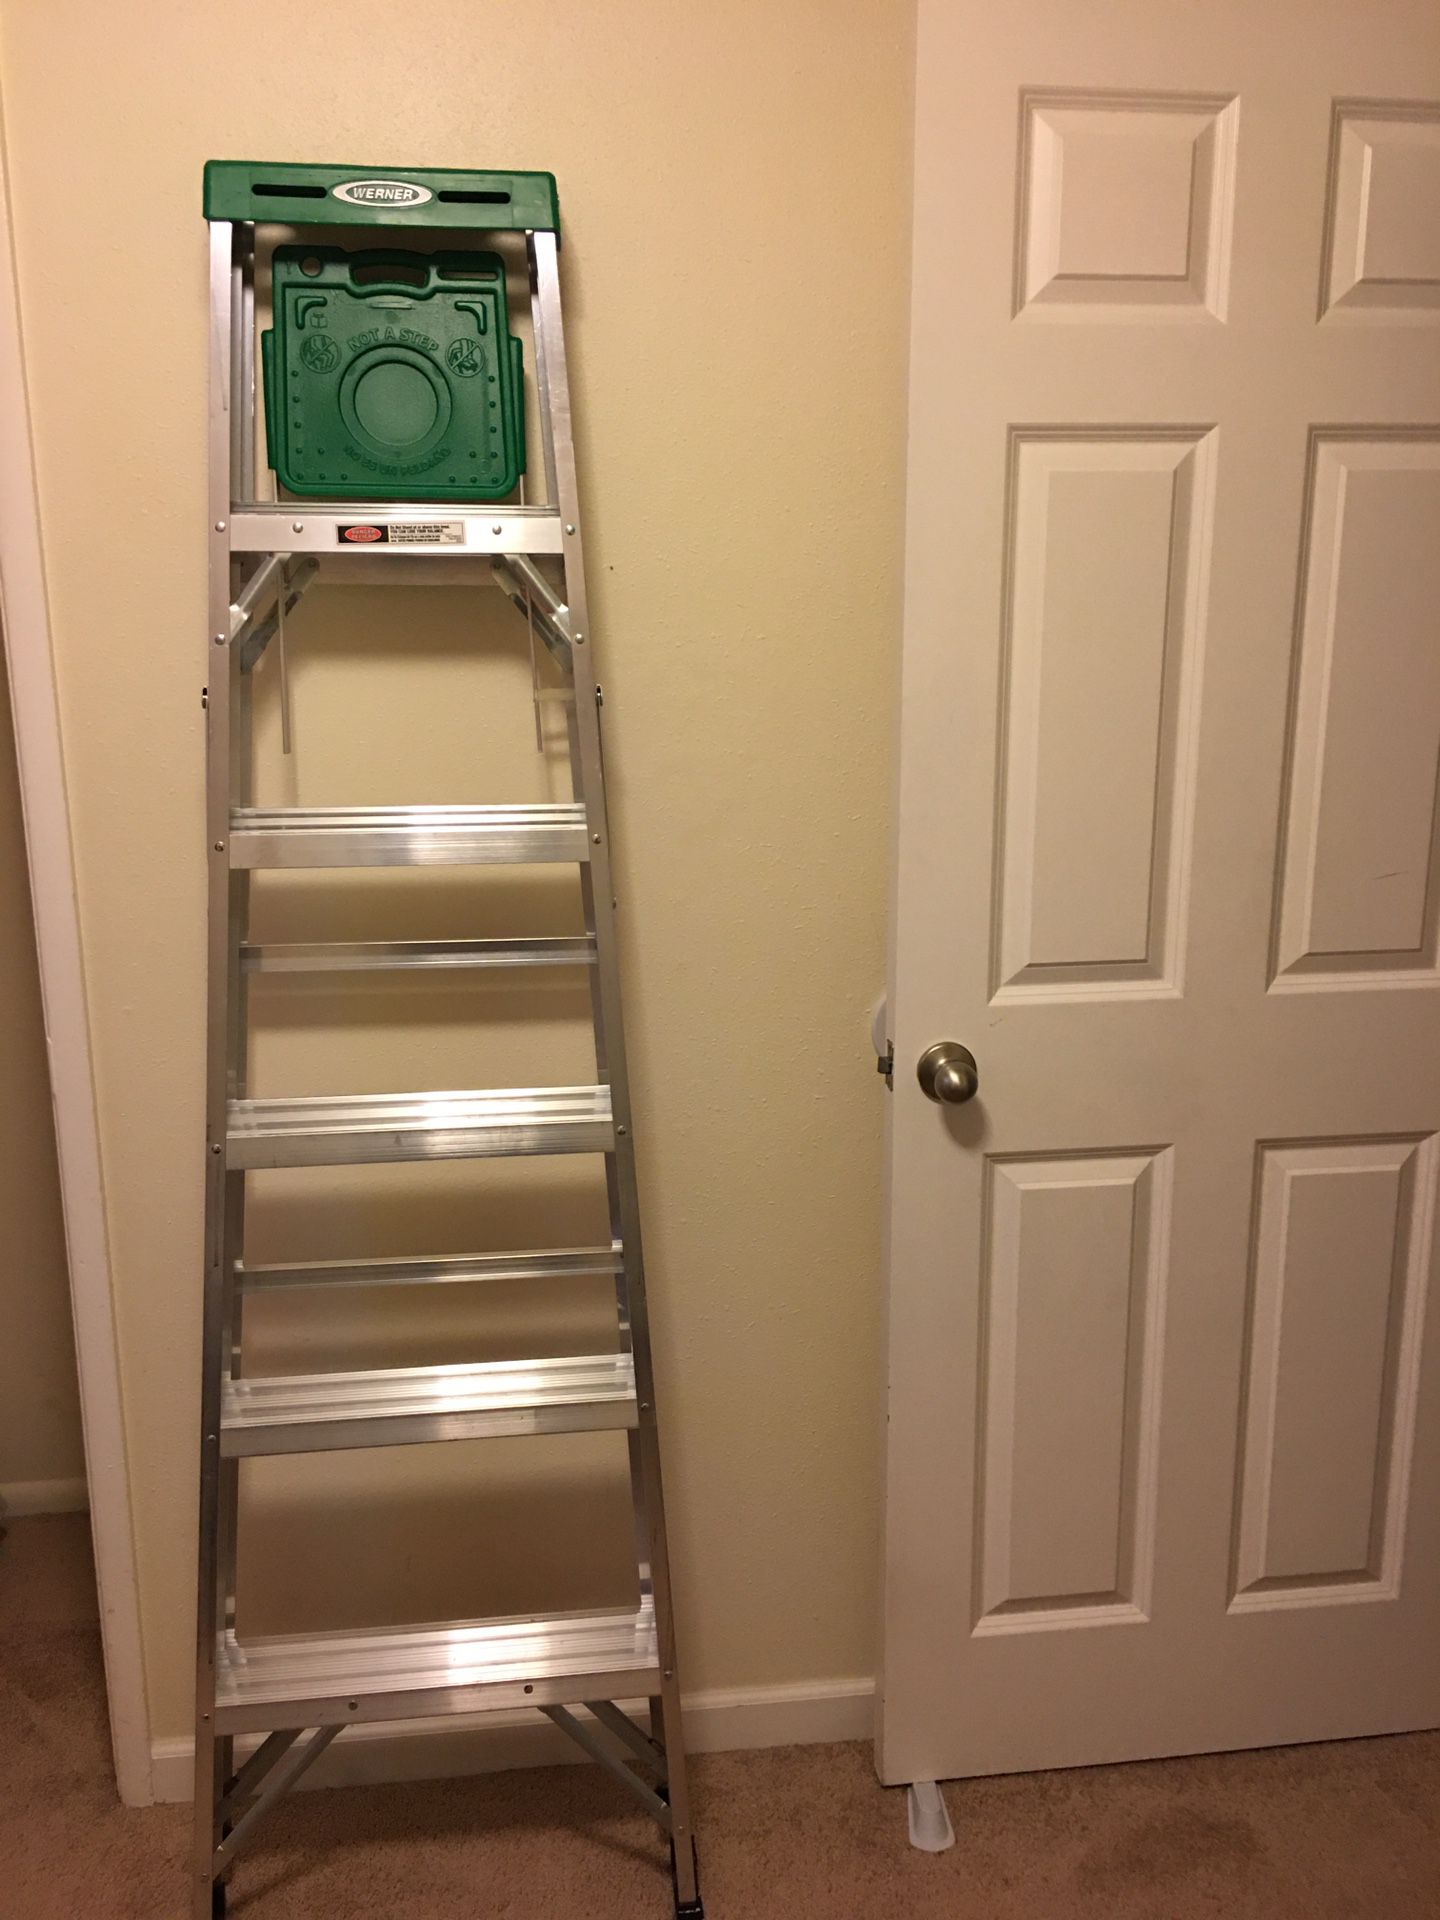 Werner 6ft Ladder - 1 Year Old Barely Used